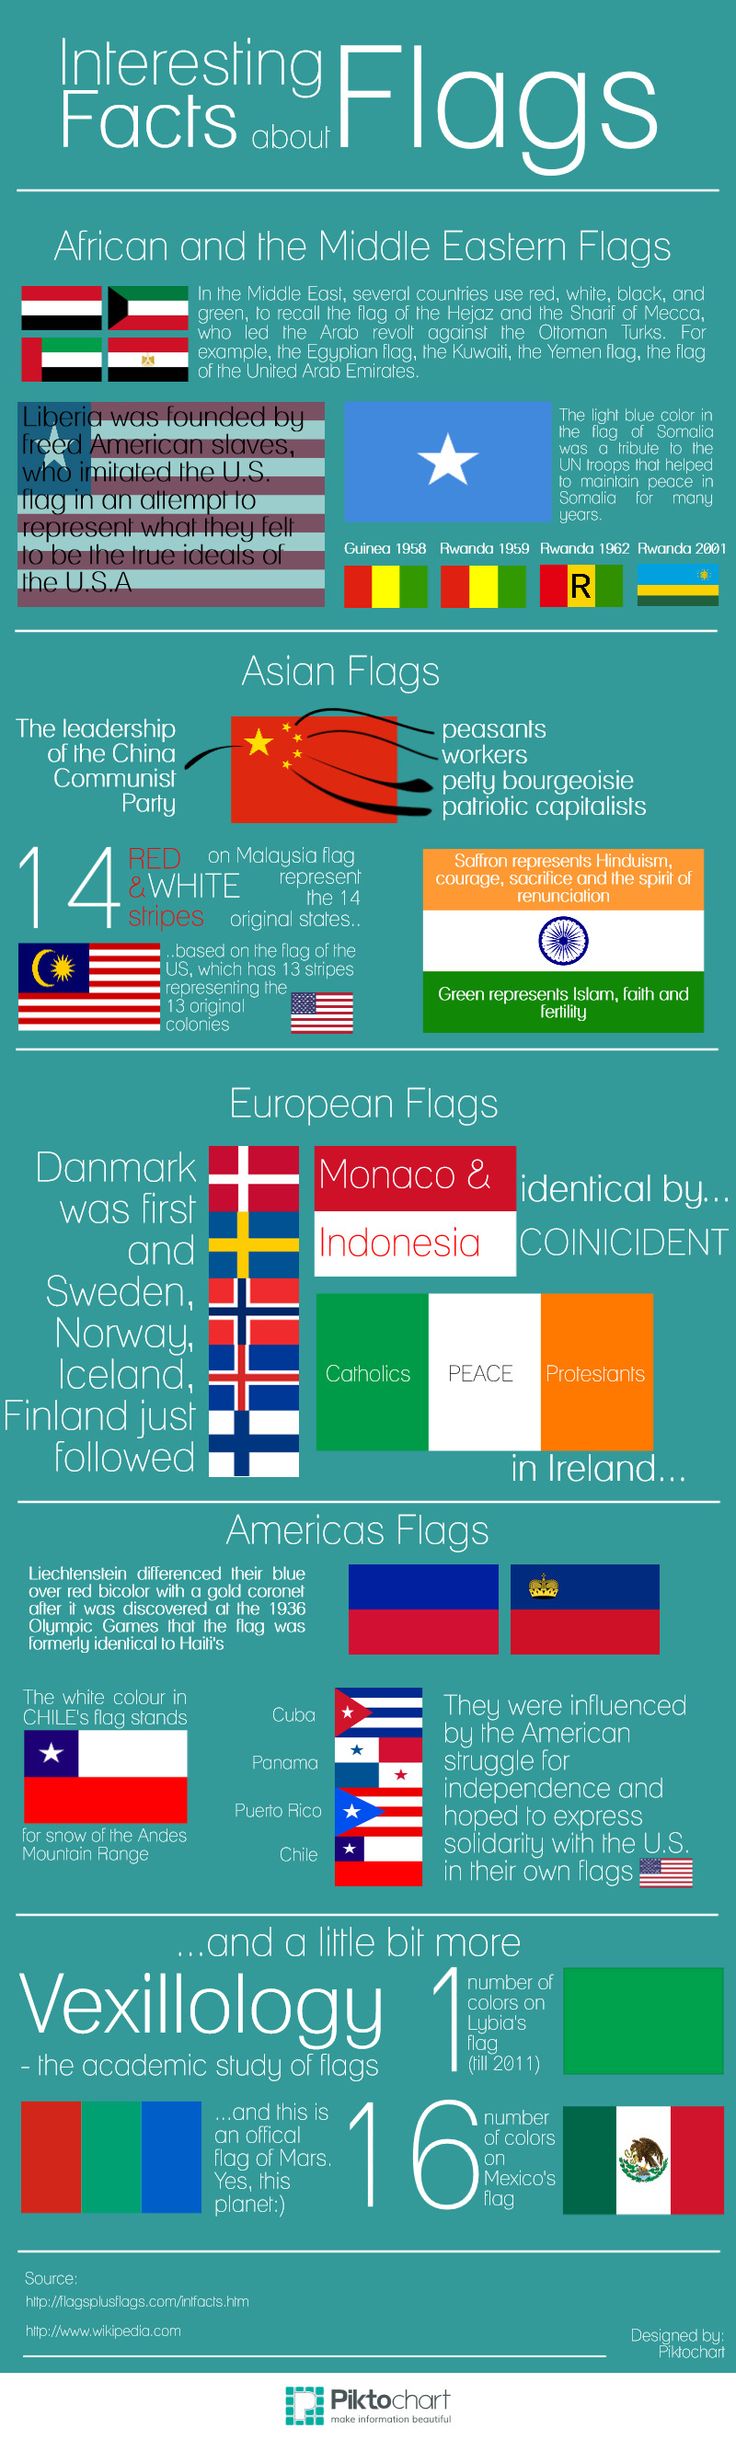 Interesting Facts About Flags Infographic